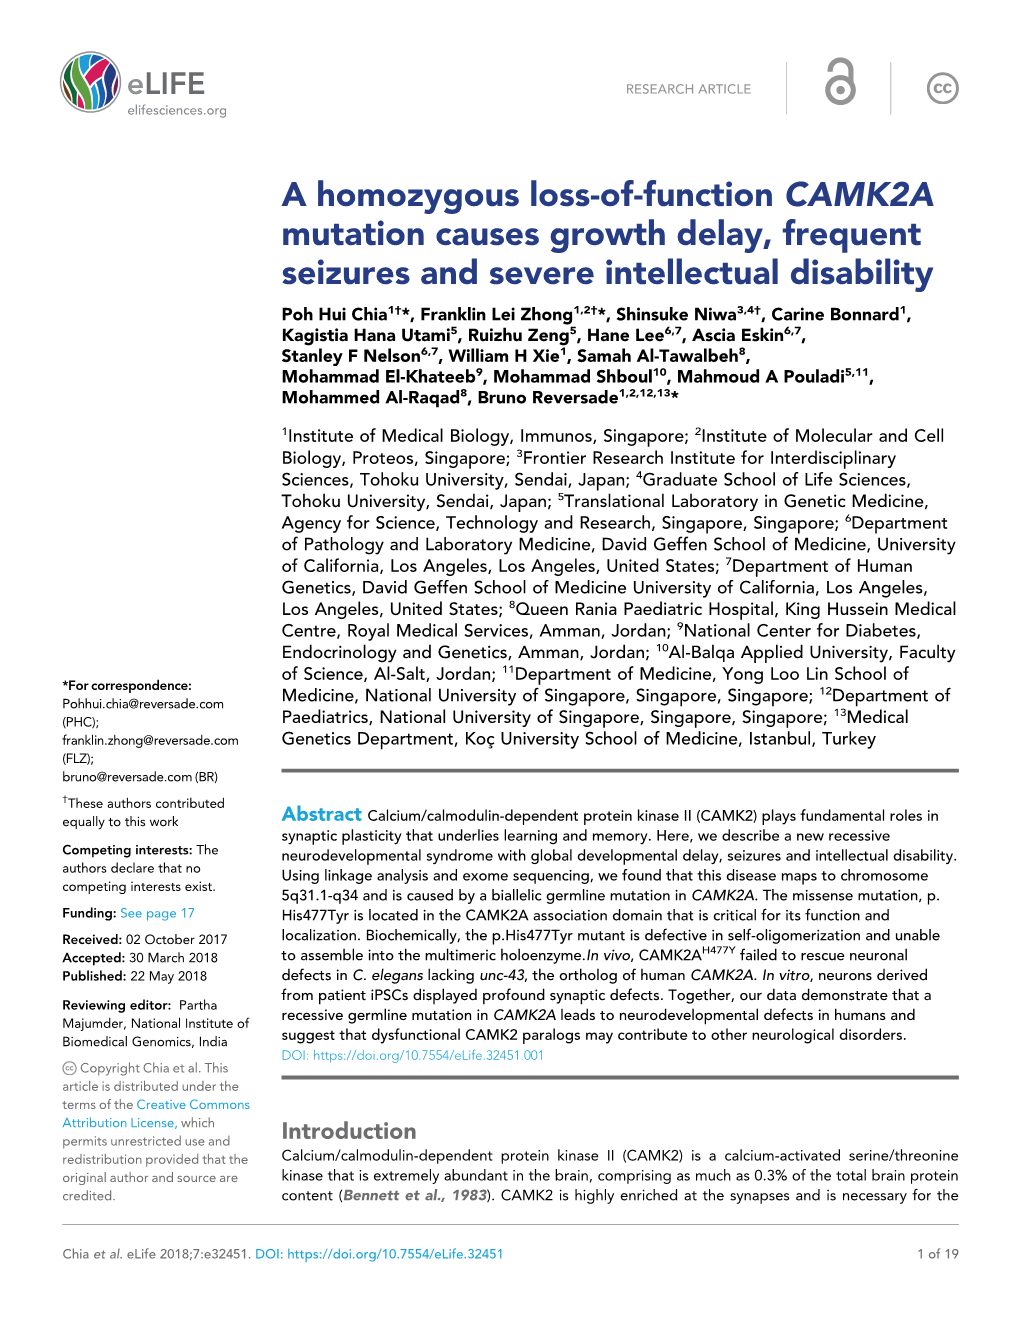 A Homozygous Loss-Of-Function CAMK2A Mutation Causes Growth